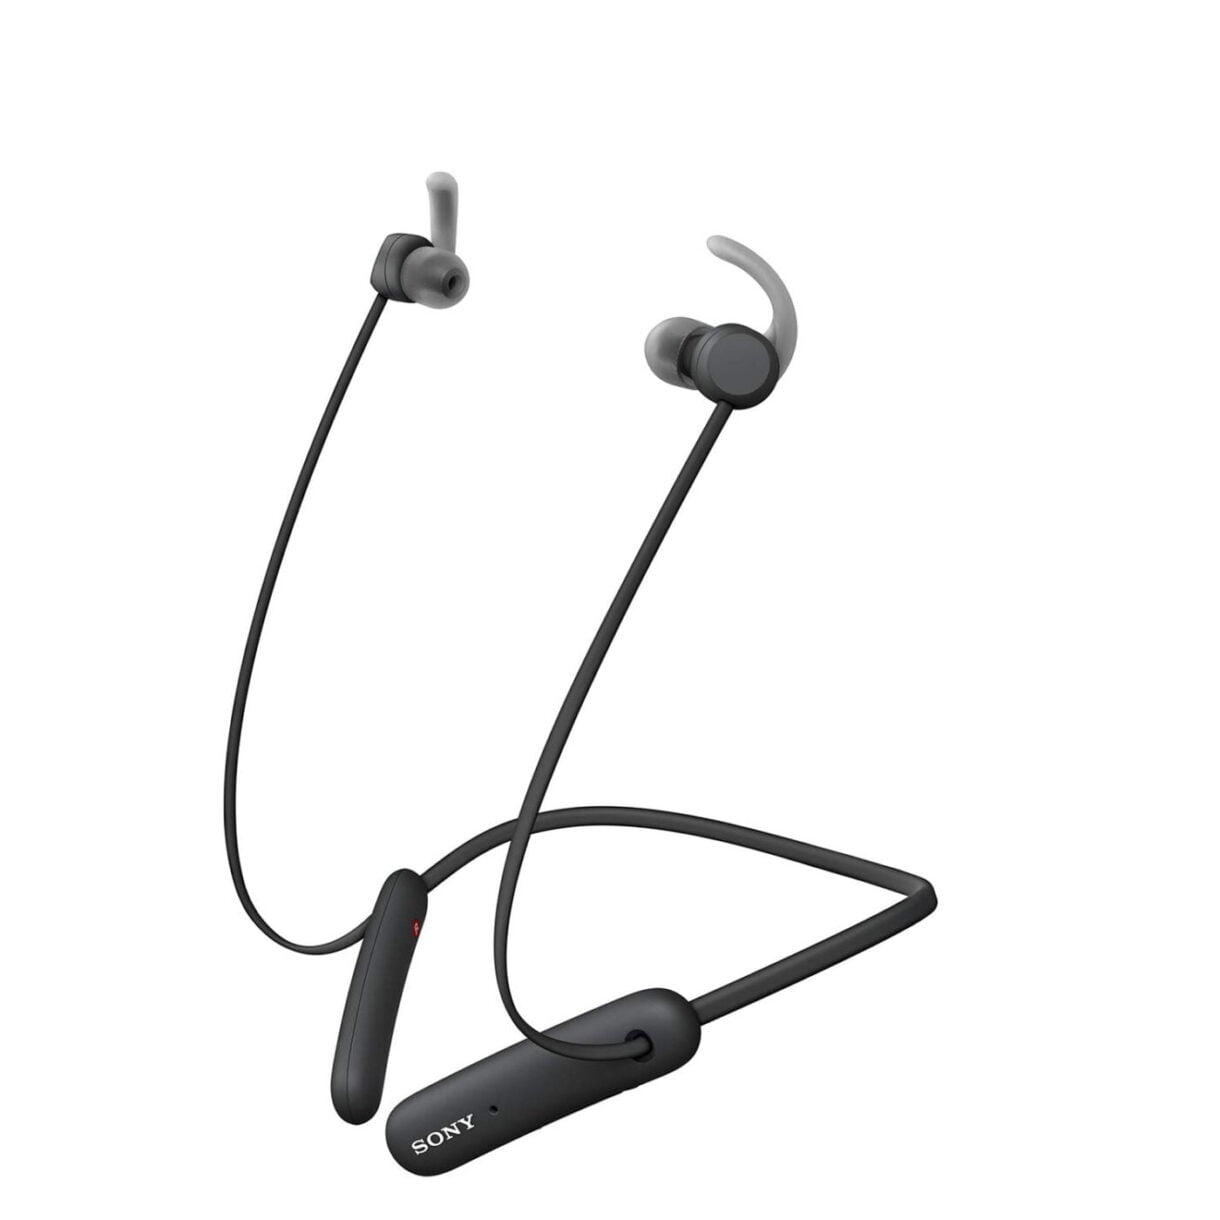 Sony WI-SP510 Wireless Sports Extra Bass in-Ear Headphones with 15 hrs Battery Life, Quick Charge, Magnetic Earbuds